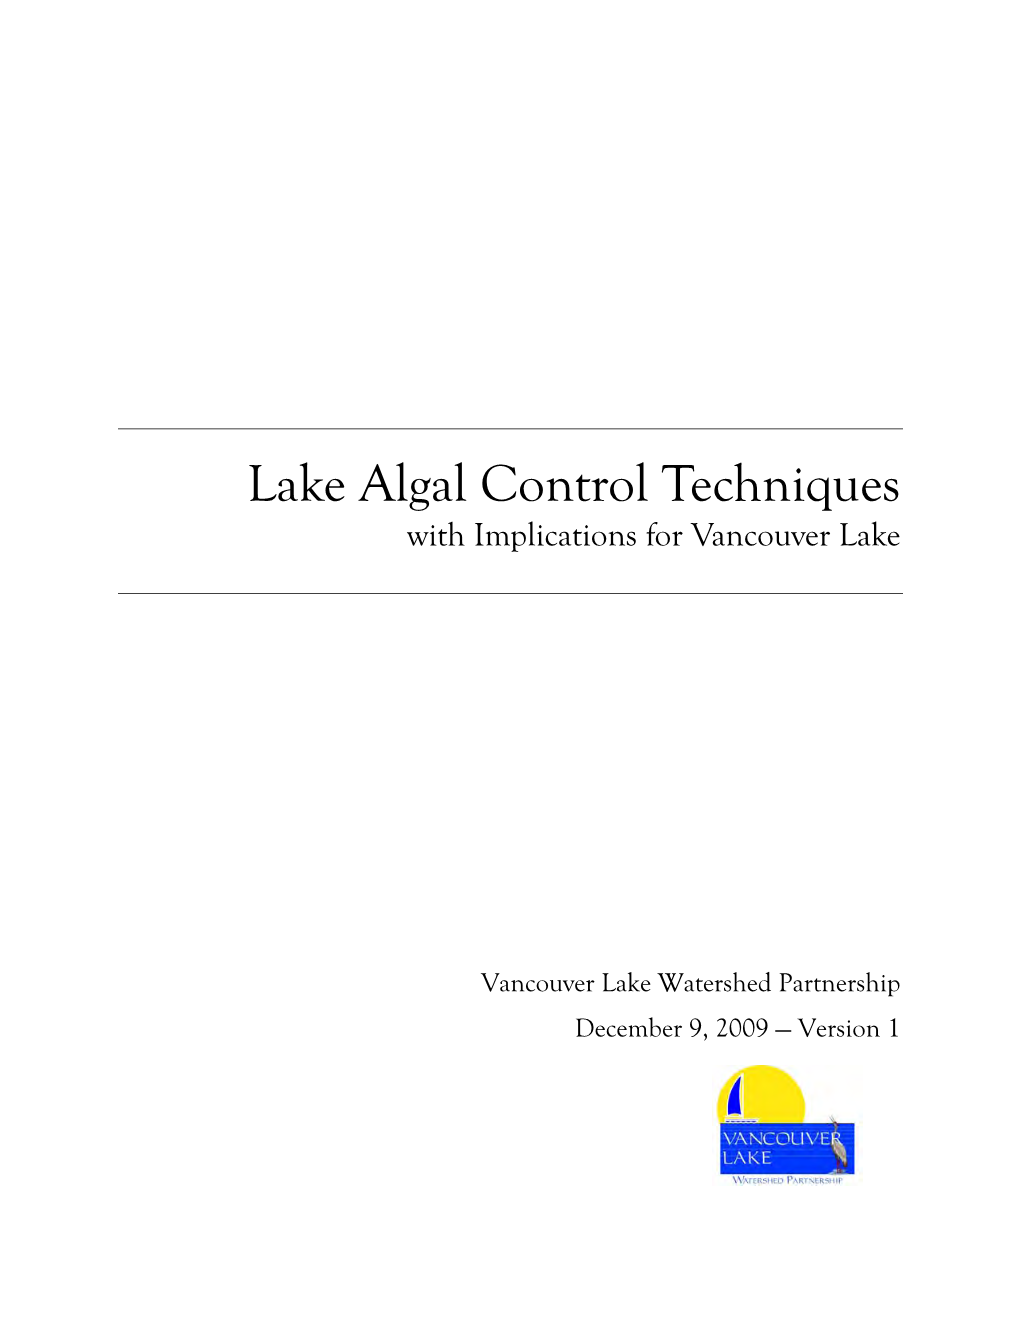 Lake Algal Control Techniques with Implications for Vancouver Lake